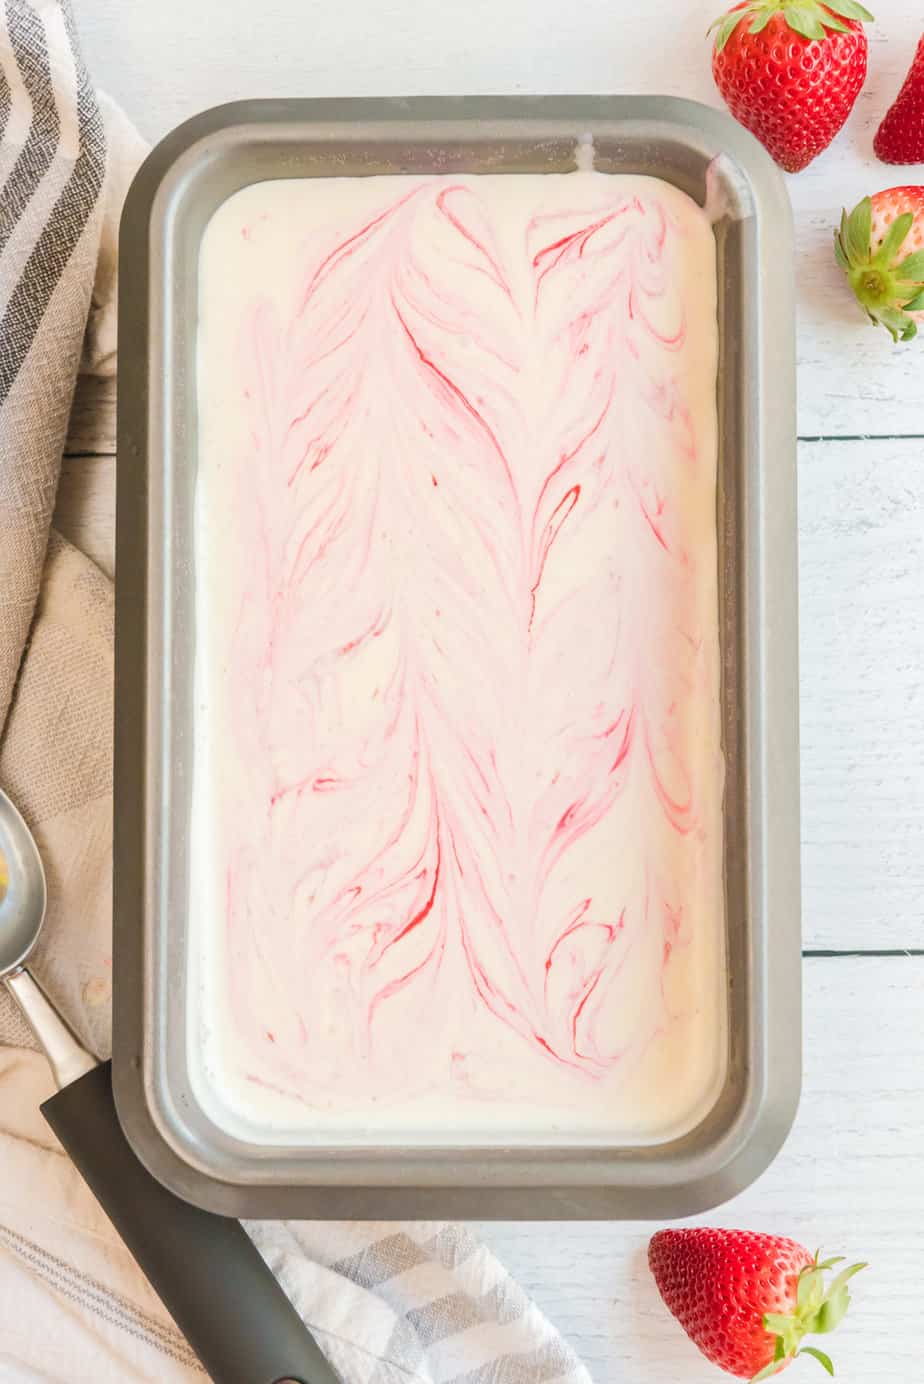 Loaf pan full of ice cream mixture from above swirled with strawberry swirls/